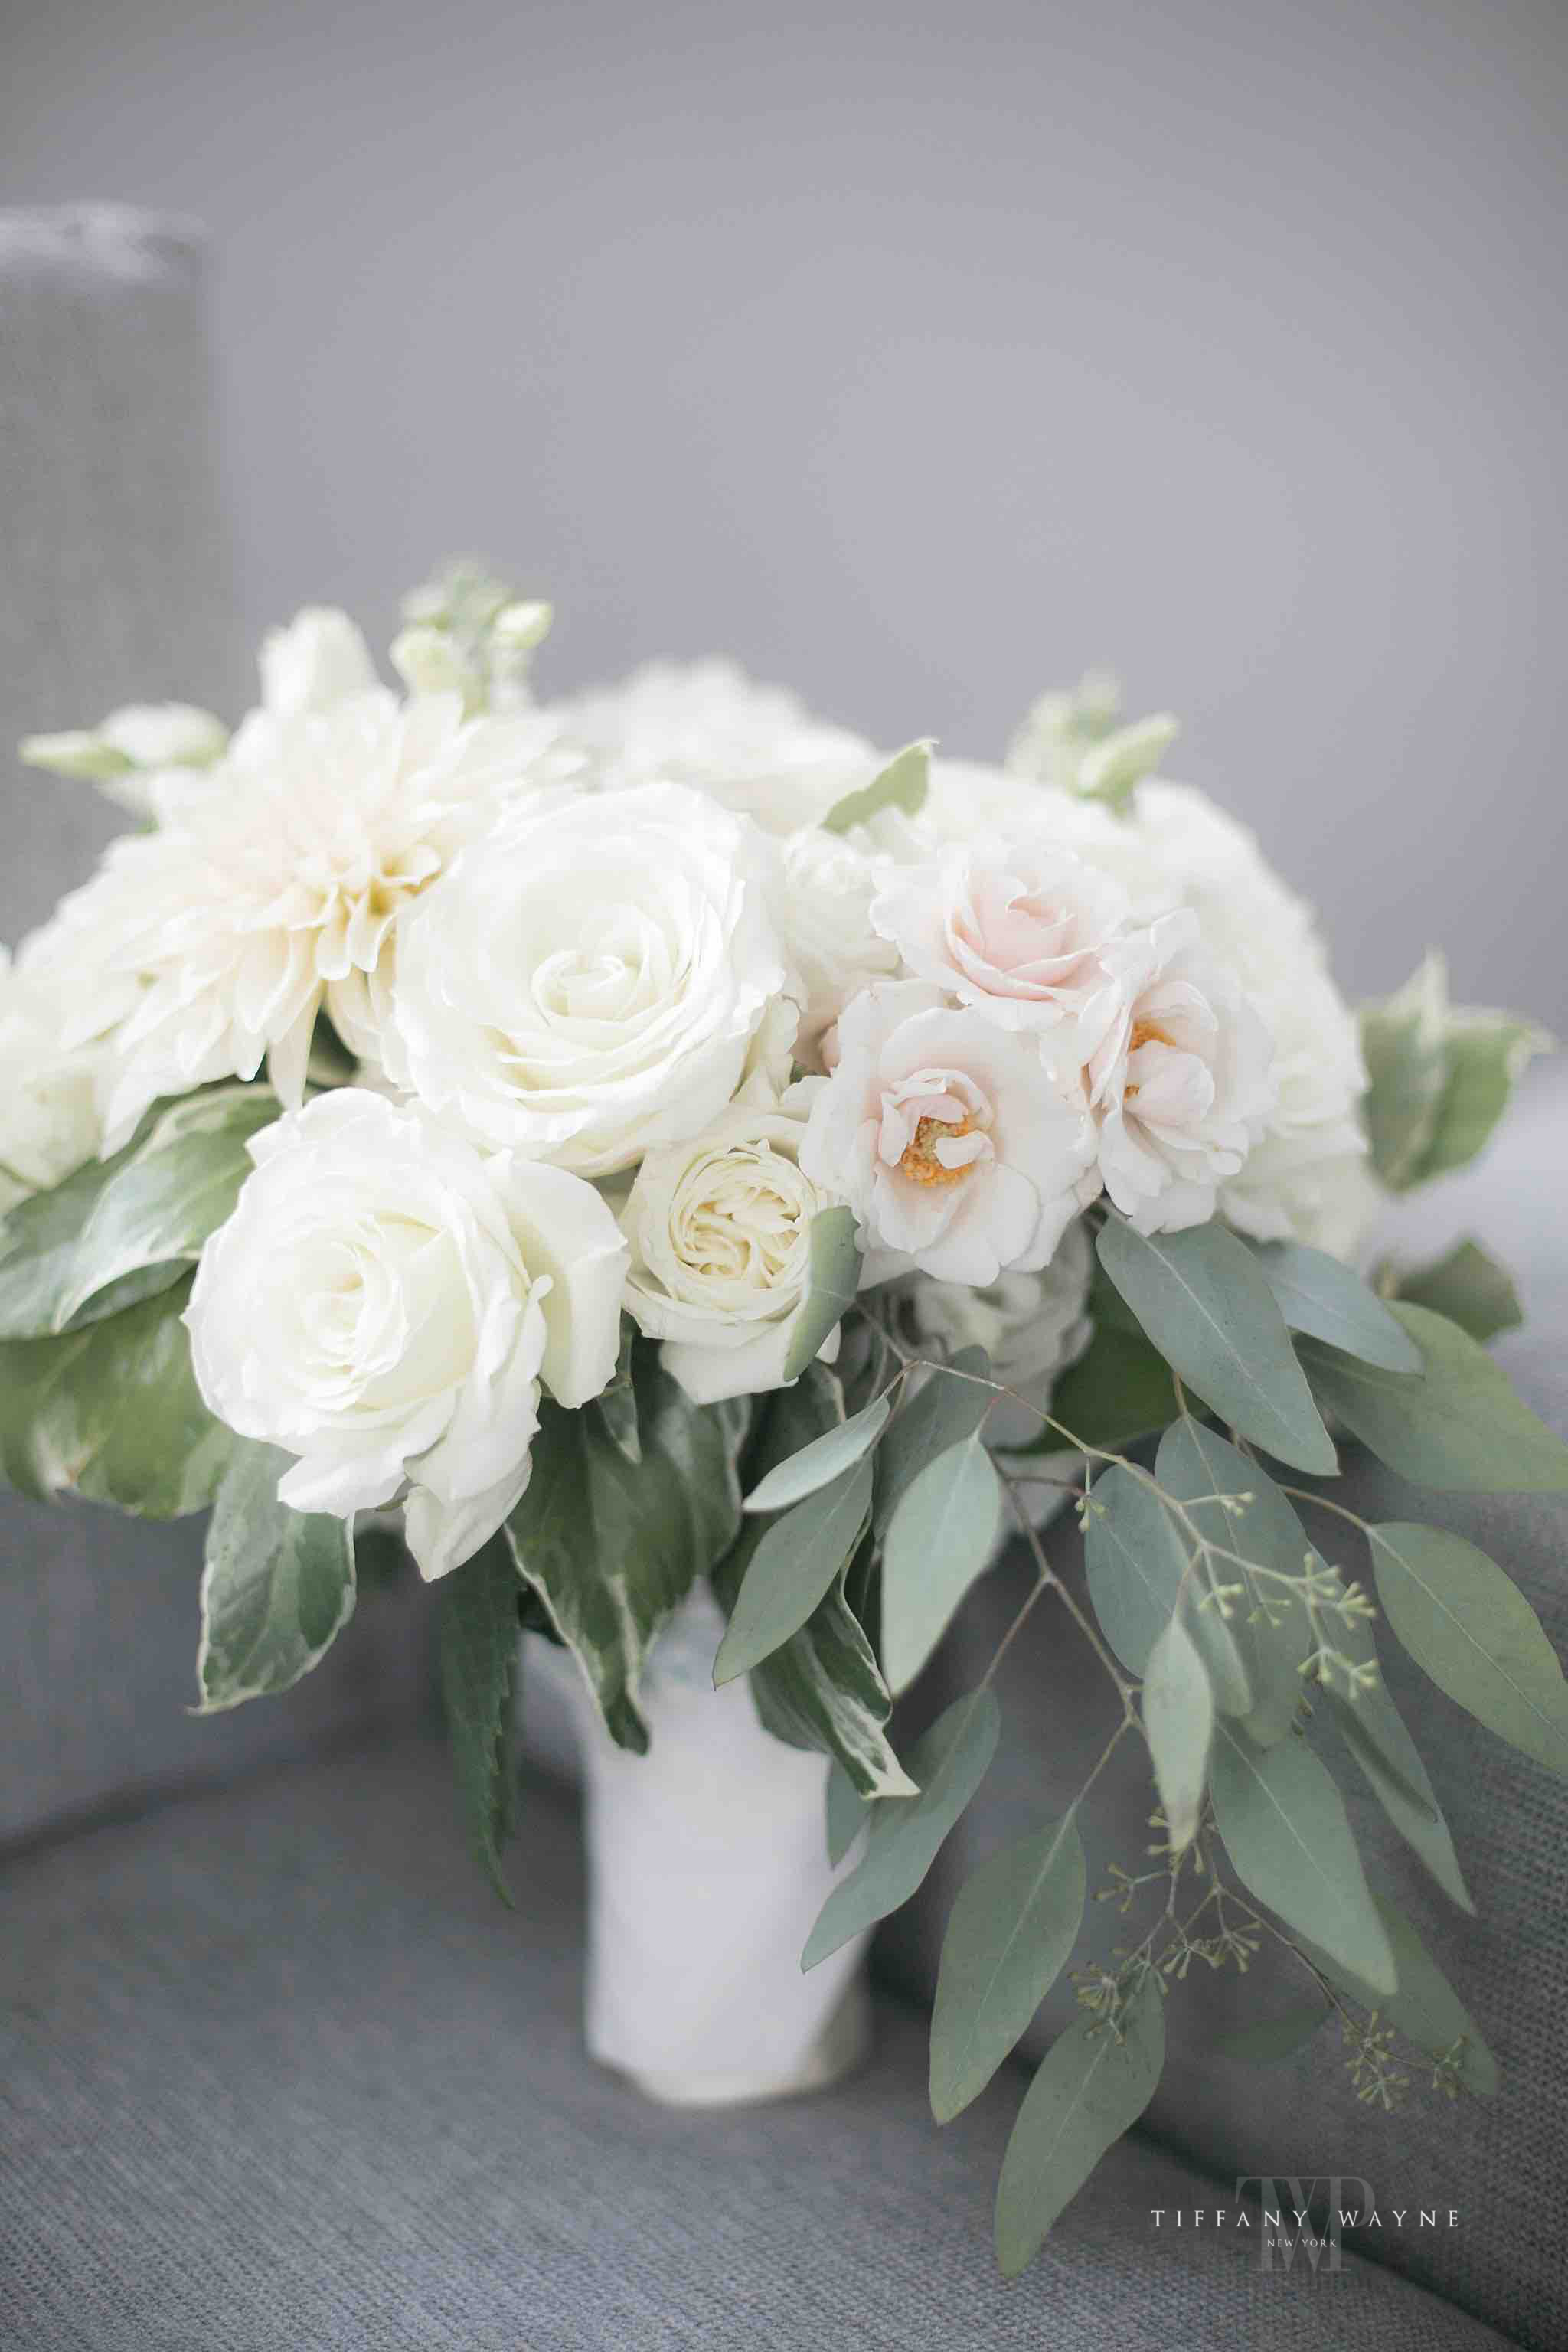 Ivory wedding bouquet by Renaissance Floral Design photographed by Tiffany Wayne Photography